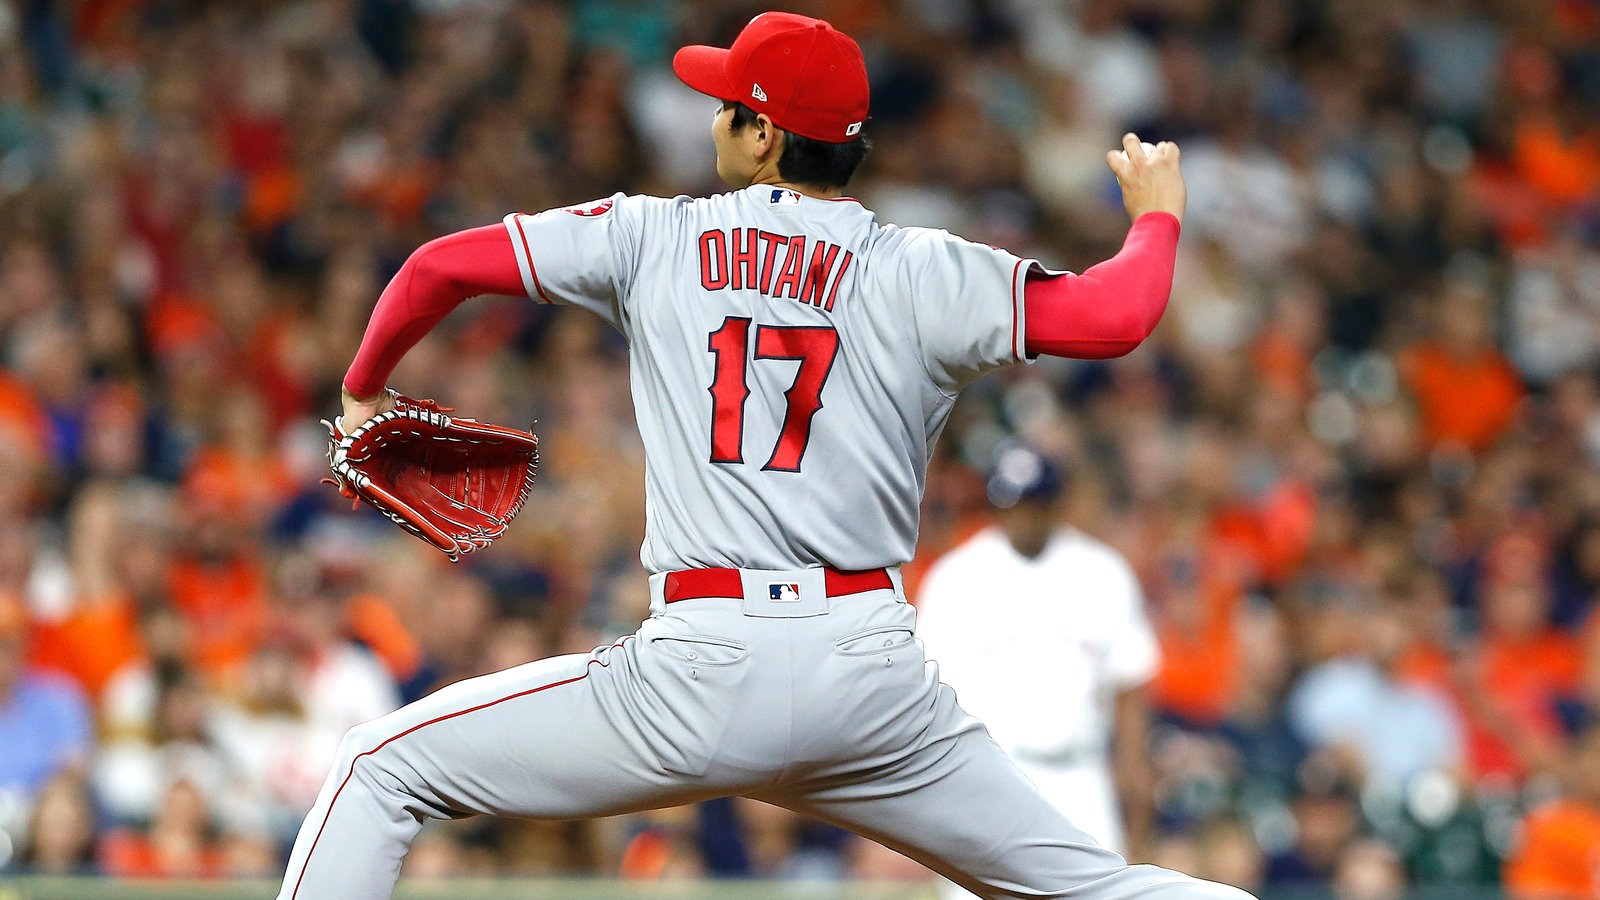 The Shohei Ohtani Hype Was Real, and So Were the Injury Fears